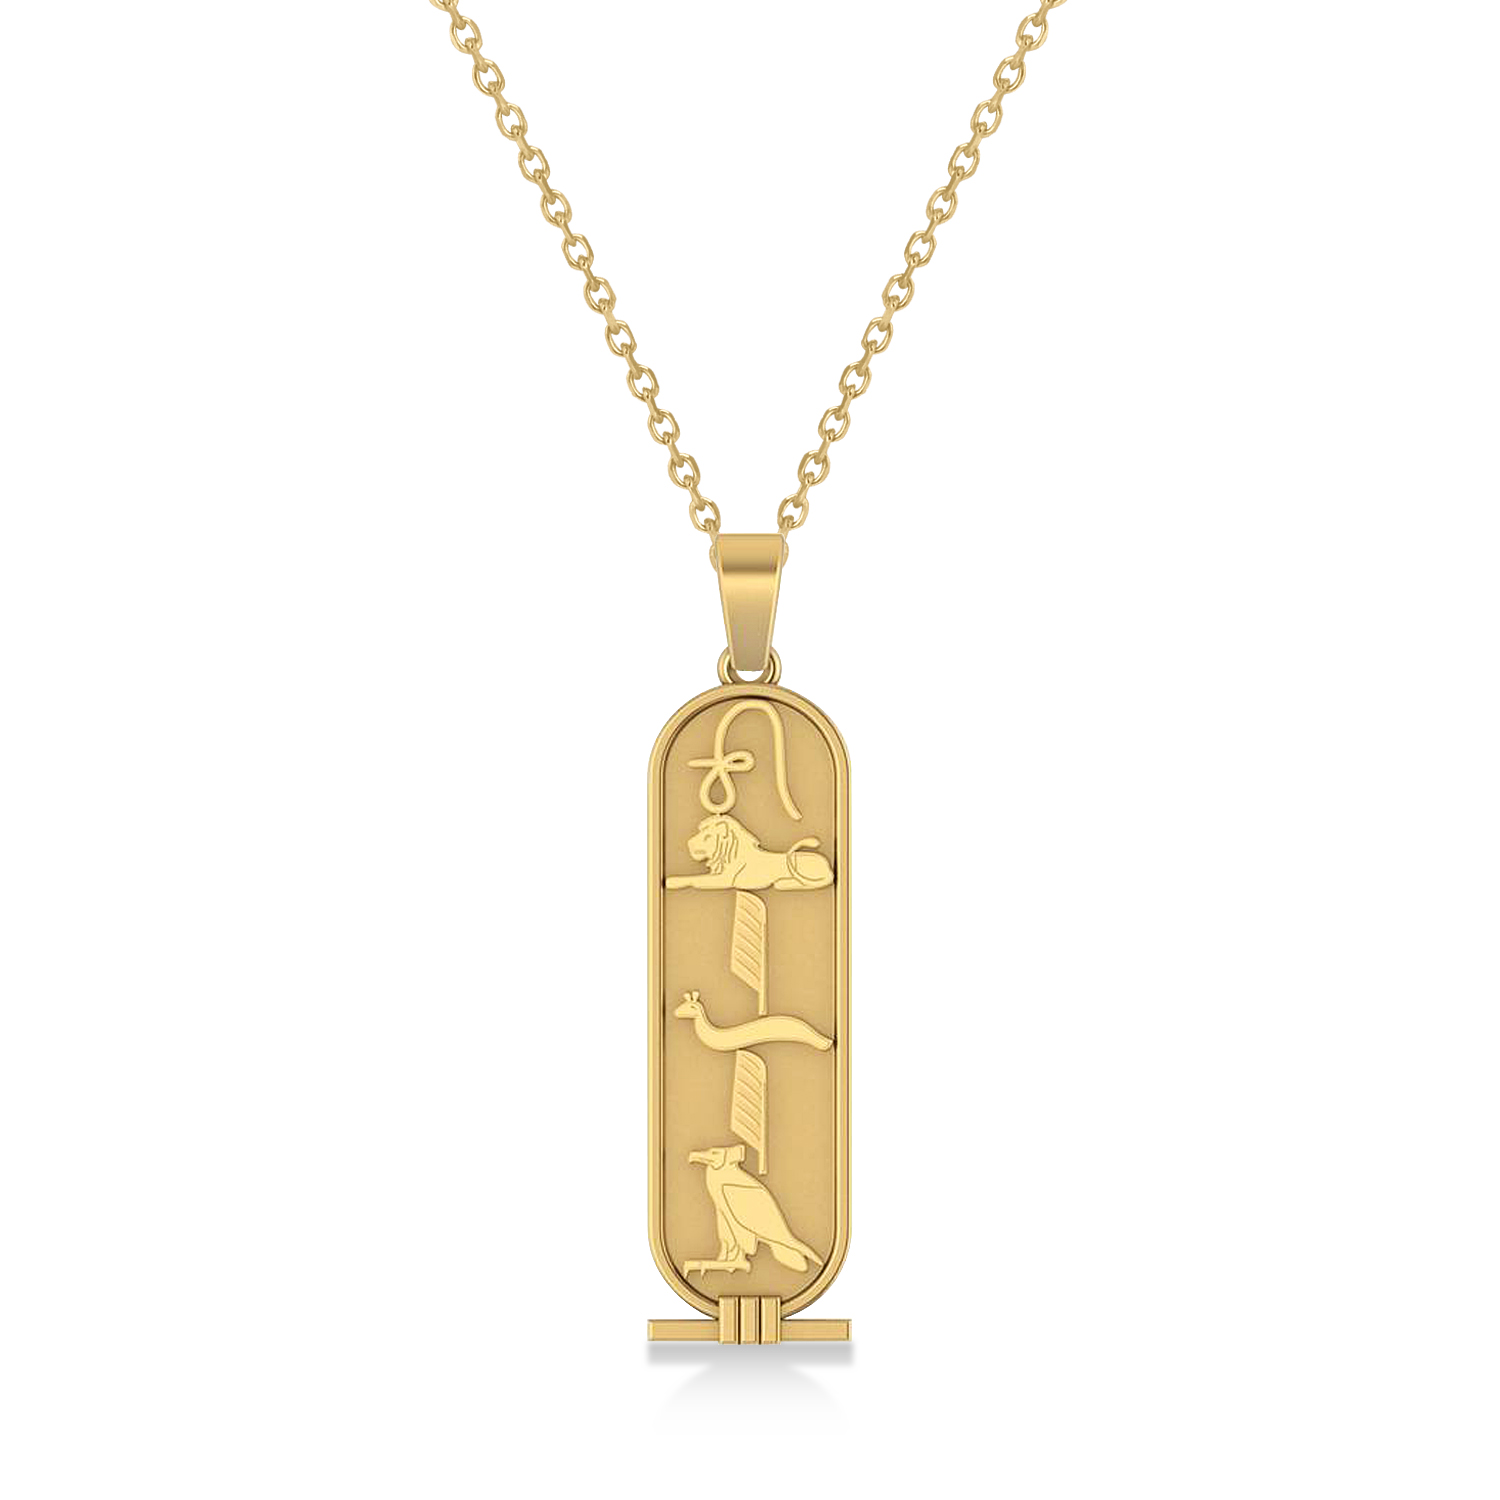 What is the meaning of an Egyptian Cartouche?